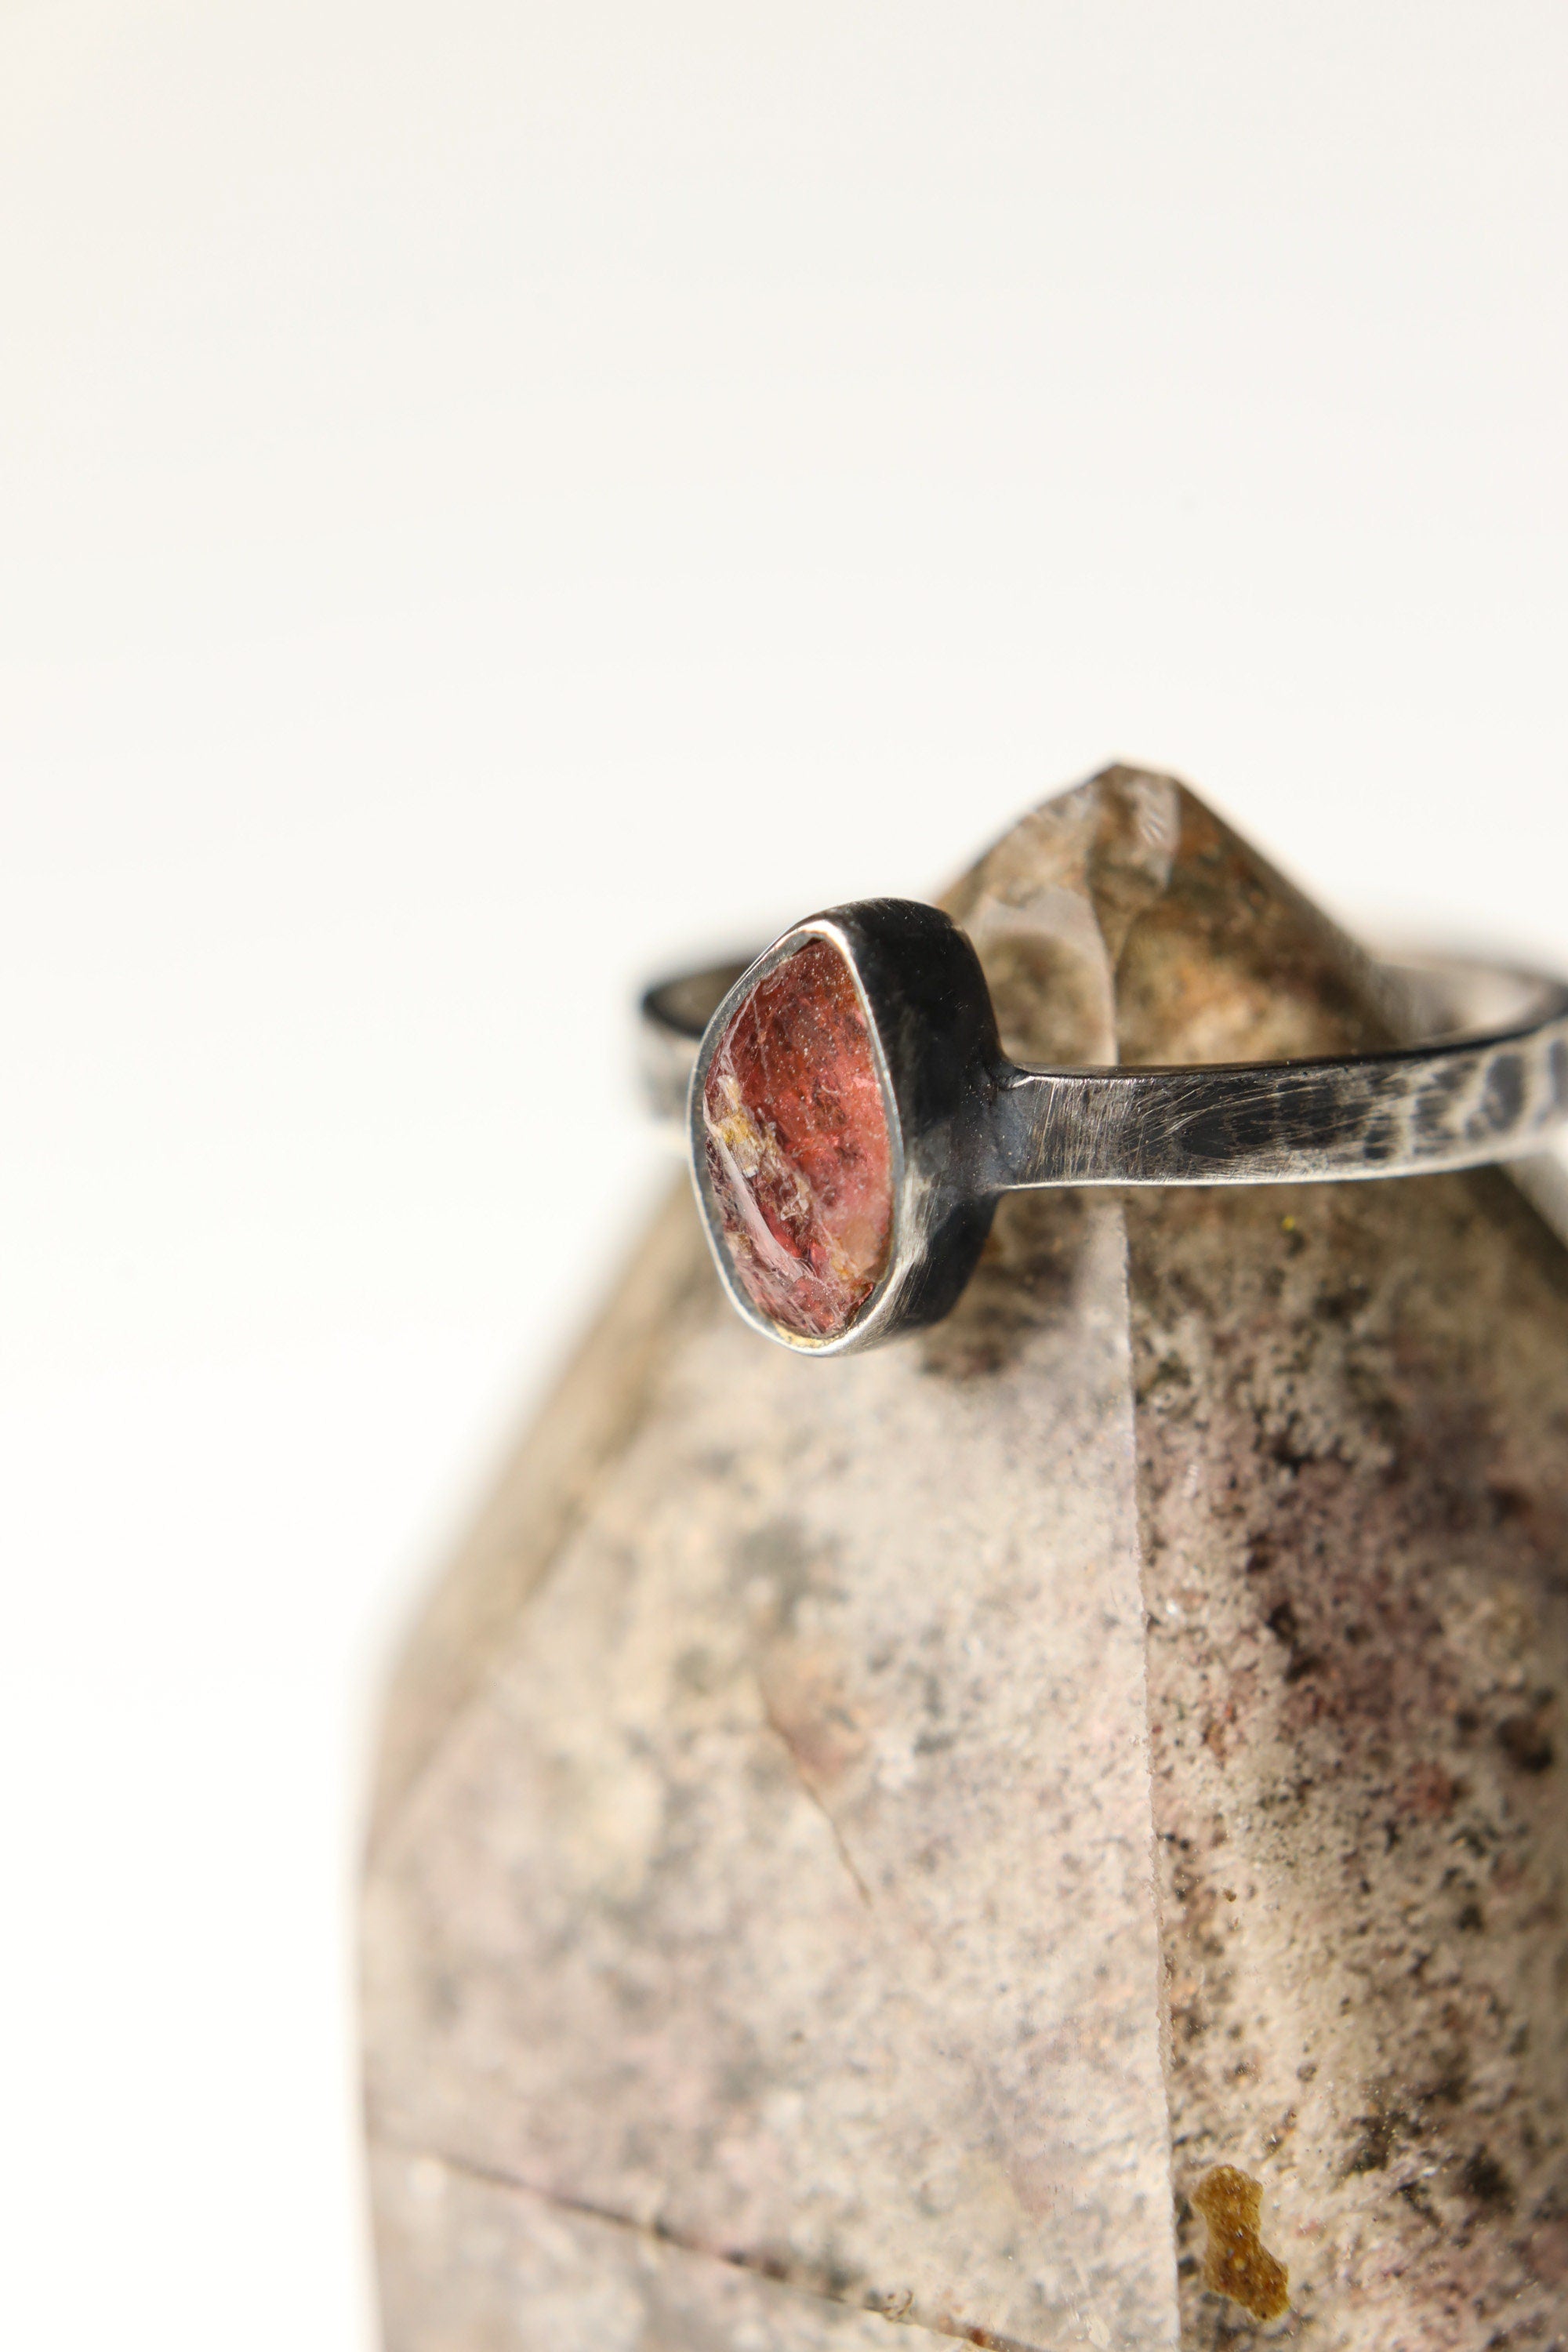 Eternal Blush - Sterling Silver Ring with Pink Tourmaline - Size 6 1/2 US - NO/08